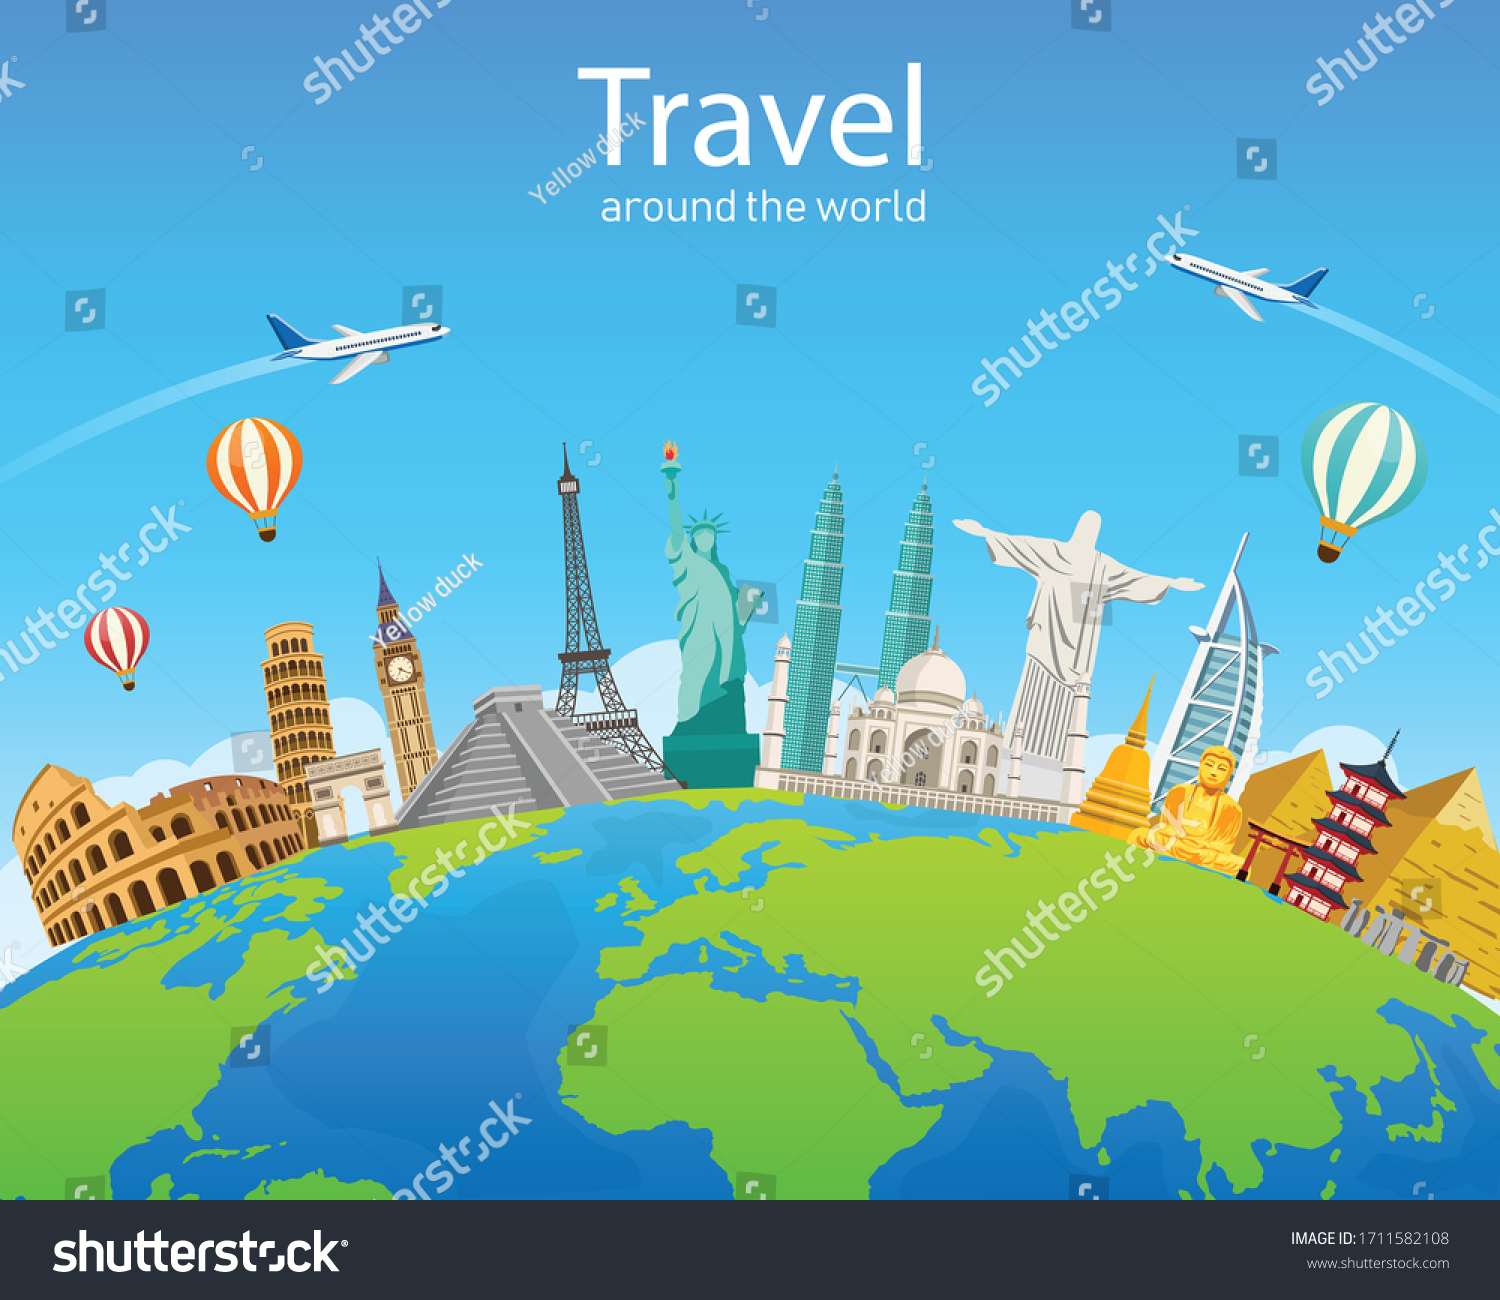 155,923 Vacation global Images, Stock Photos & Vectors | Shutterstock